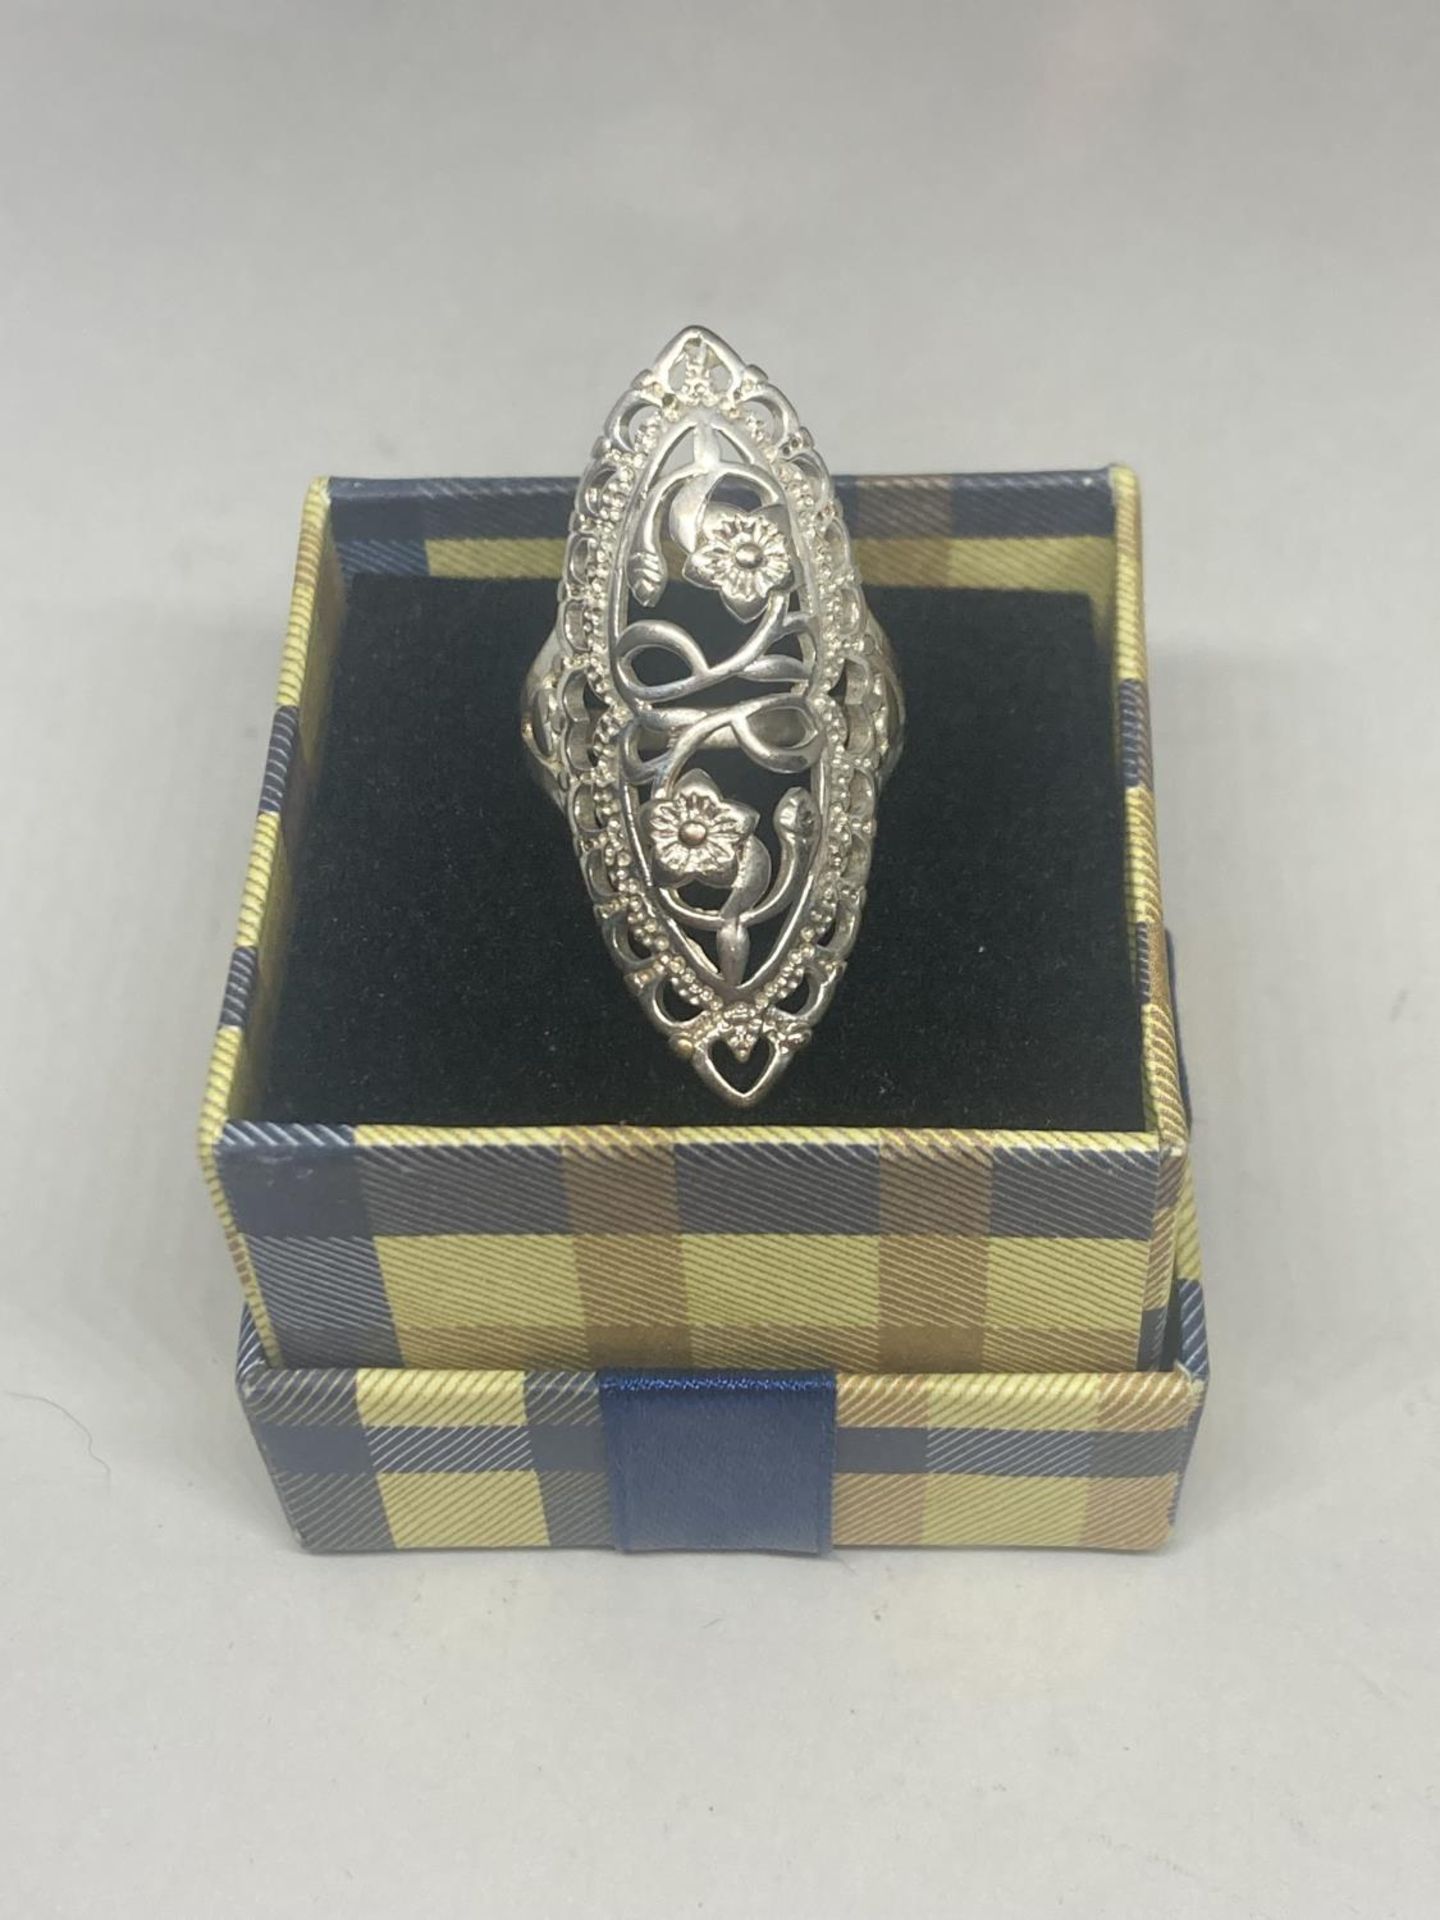 A MARKED 925 LARGE DECORATIVE FLORAL RING IN A PRESENTATION BOX